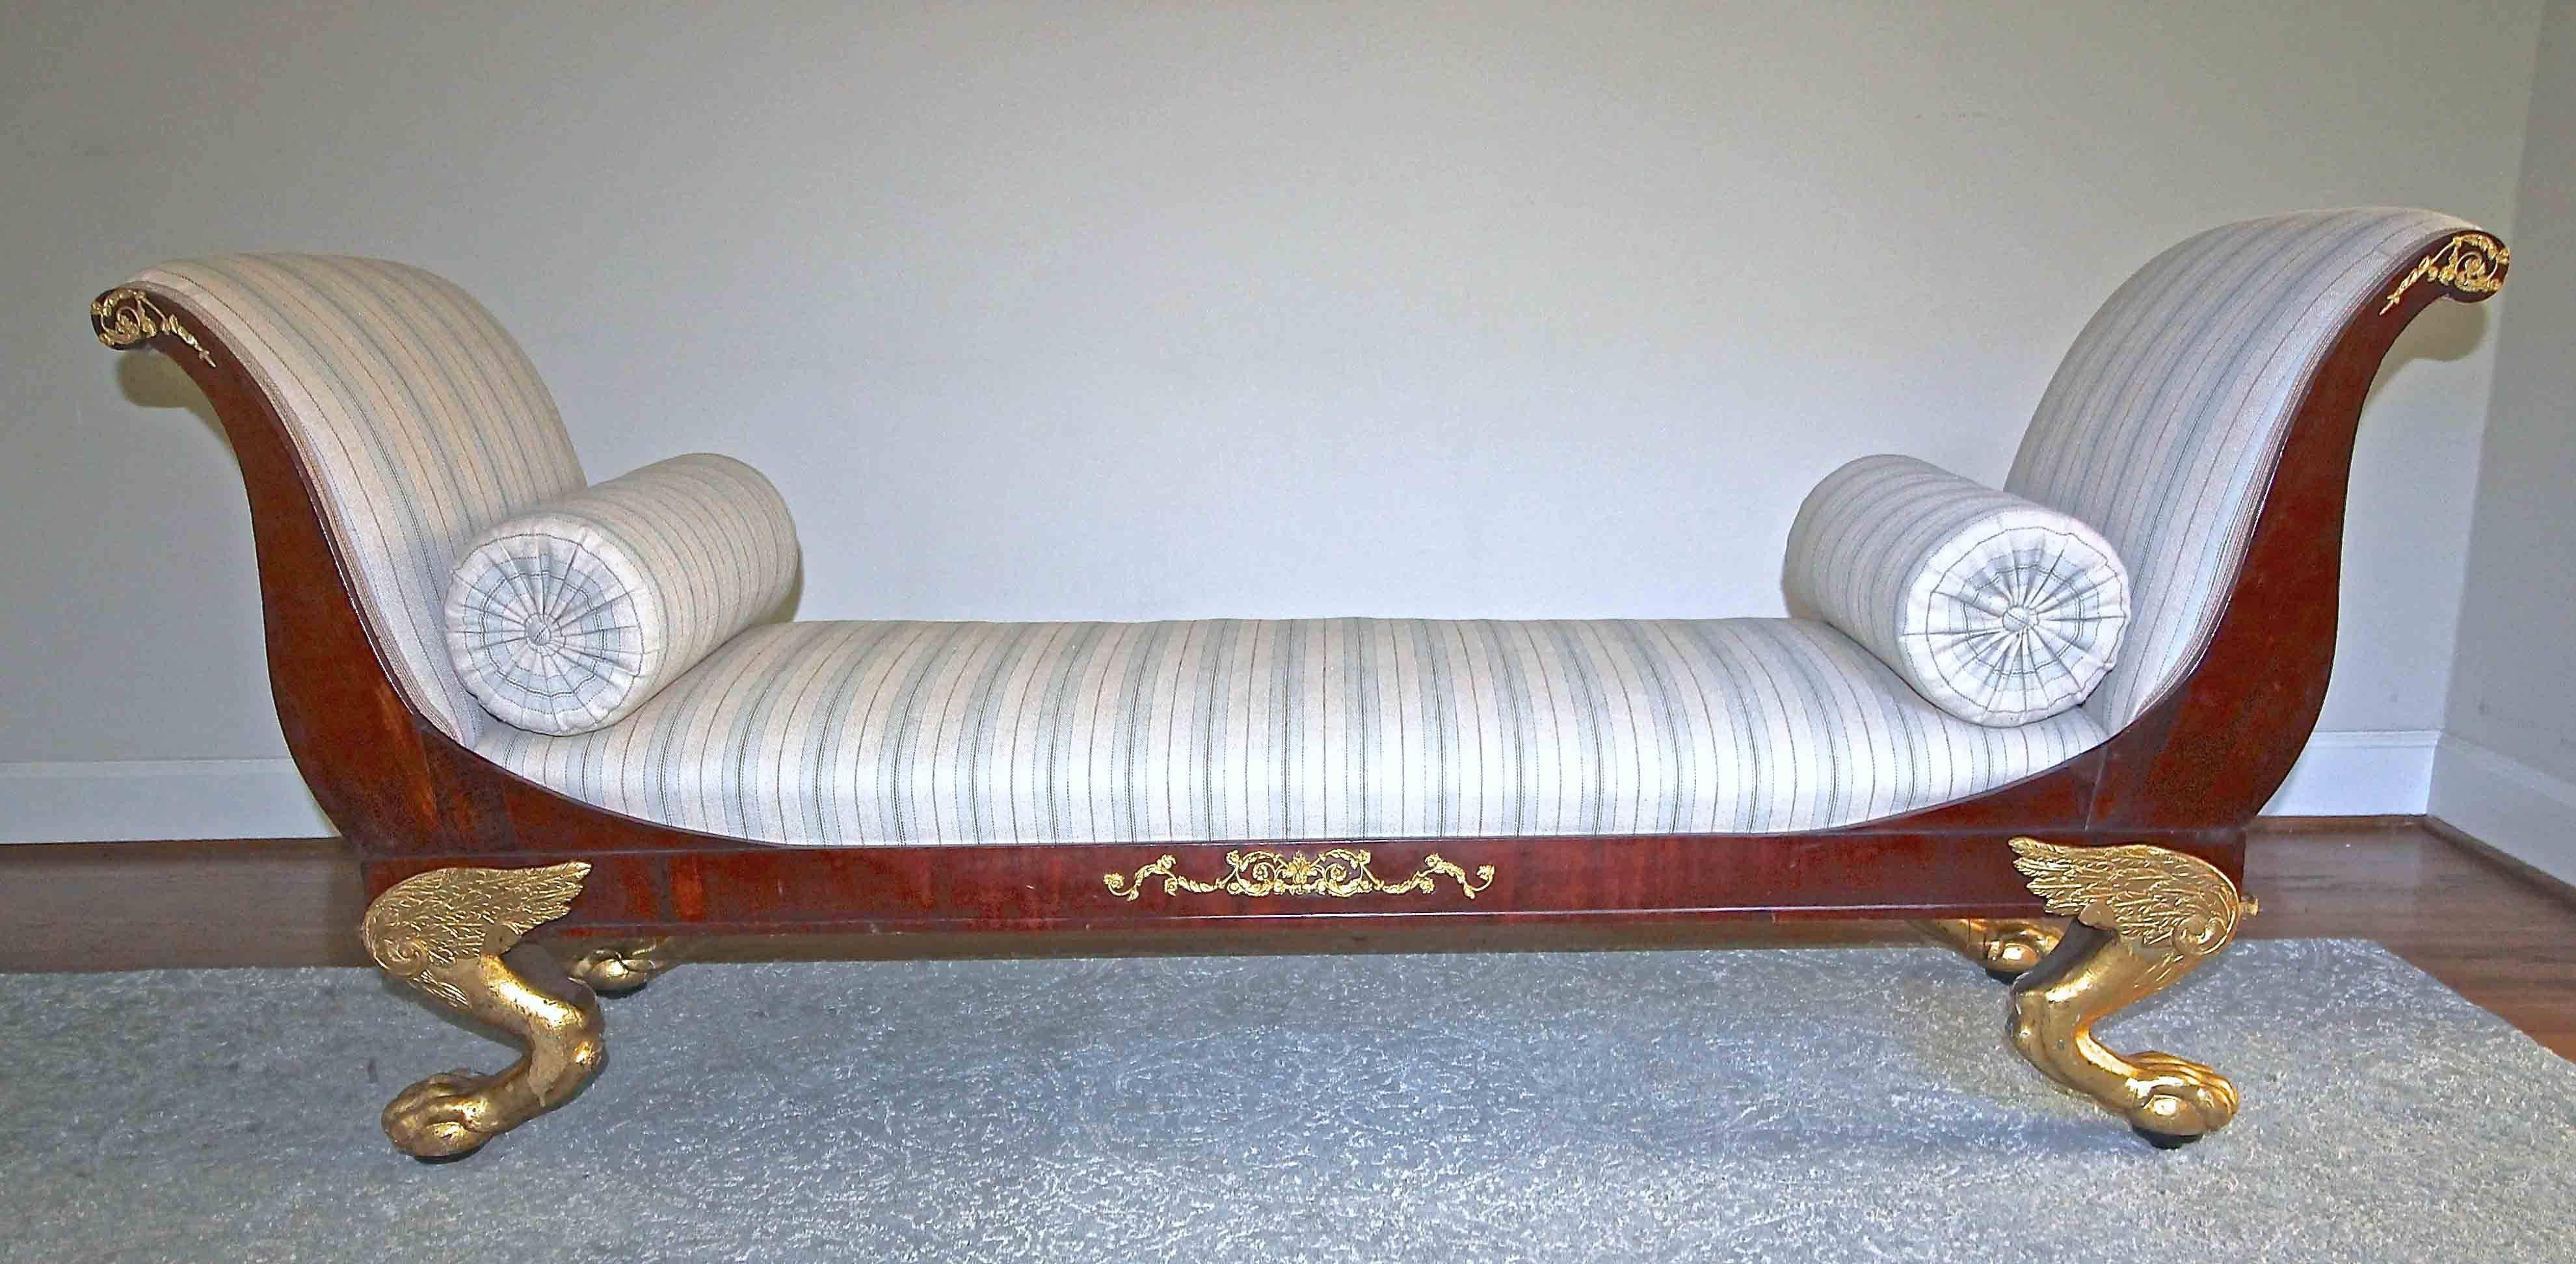 A very fine Swedish early 19th century Empire mahogany recamier or day bed with carved water gilt gold winged paw feet. Decorated with gilt bronze ormolu mounts. The narrower width accommodates use as bench at foot of bed or as a window seat.